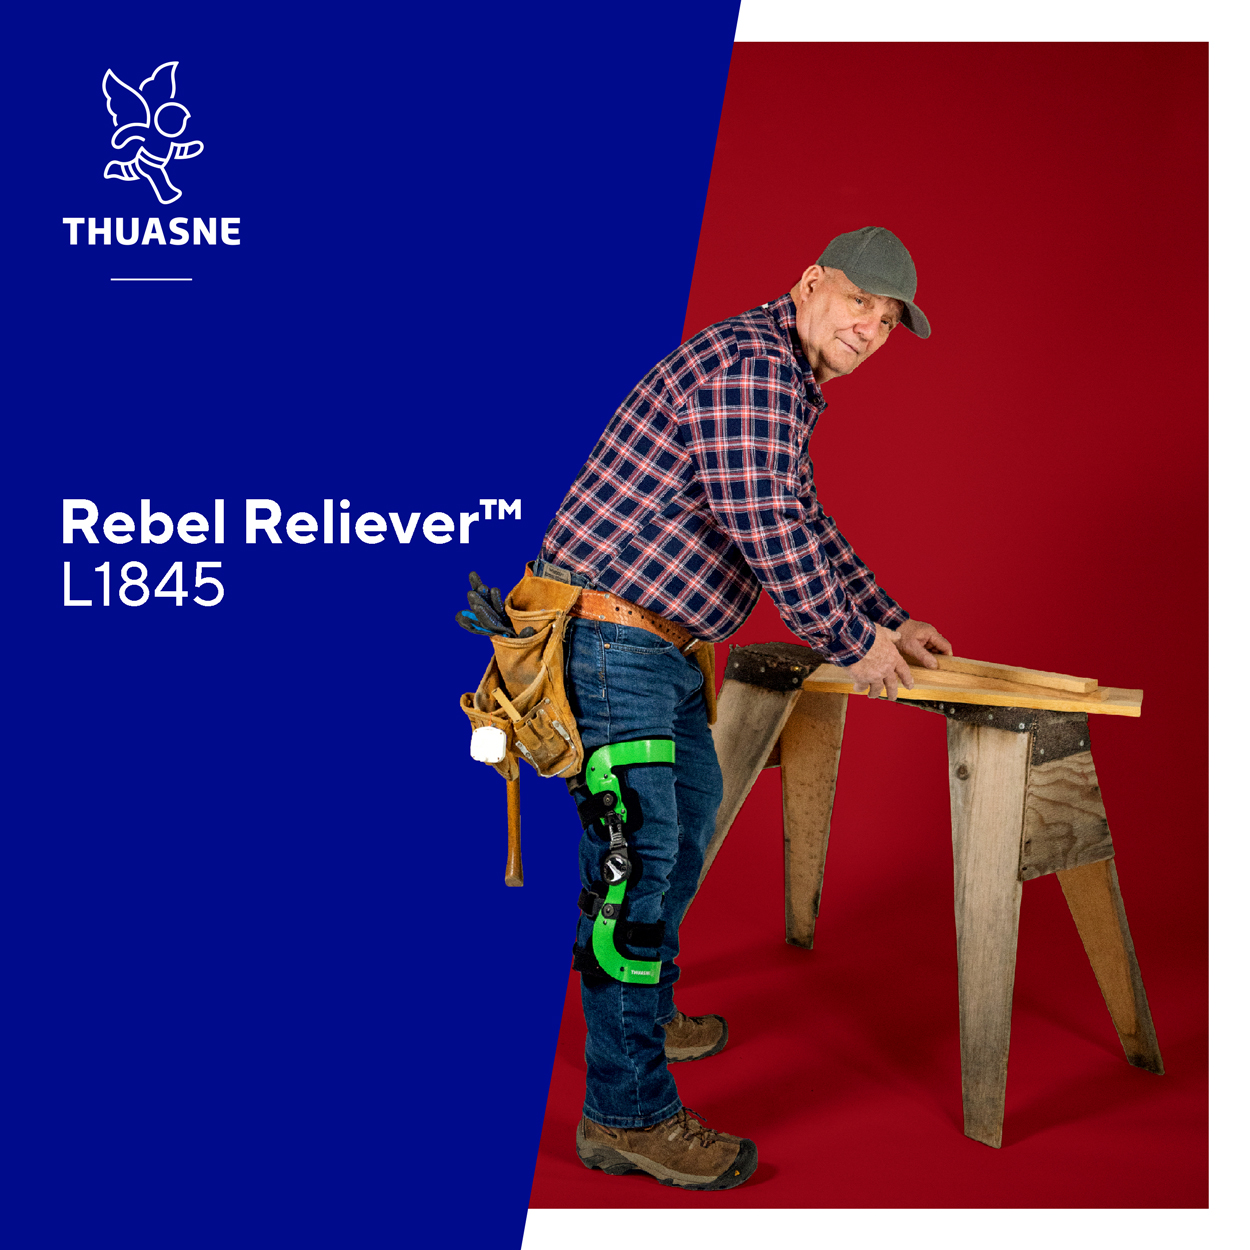 Thuasne USA’s Rebel Reliever and Rebel Series awarded L1845, ensuring patients and practitioners access to the best care and devices - Image